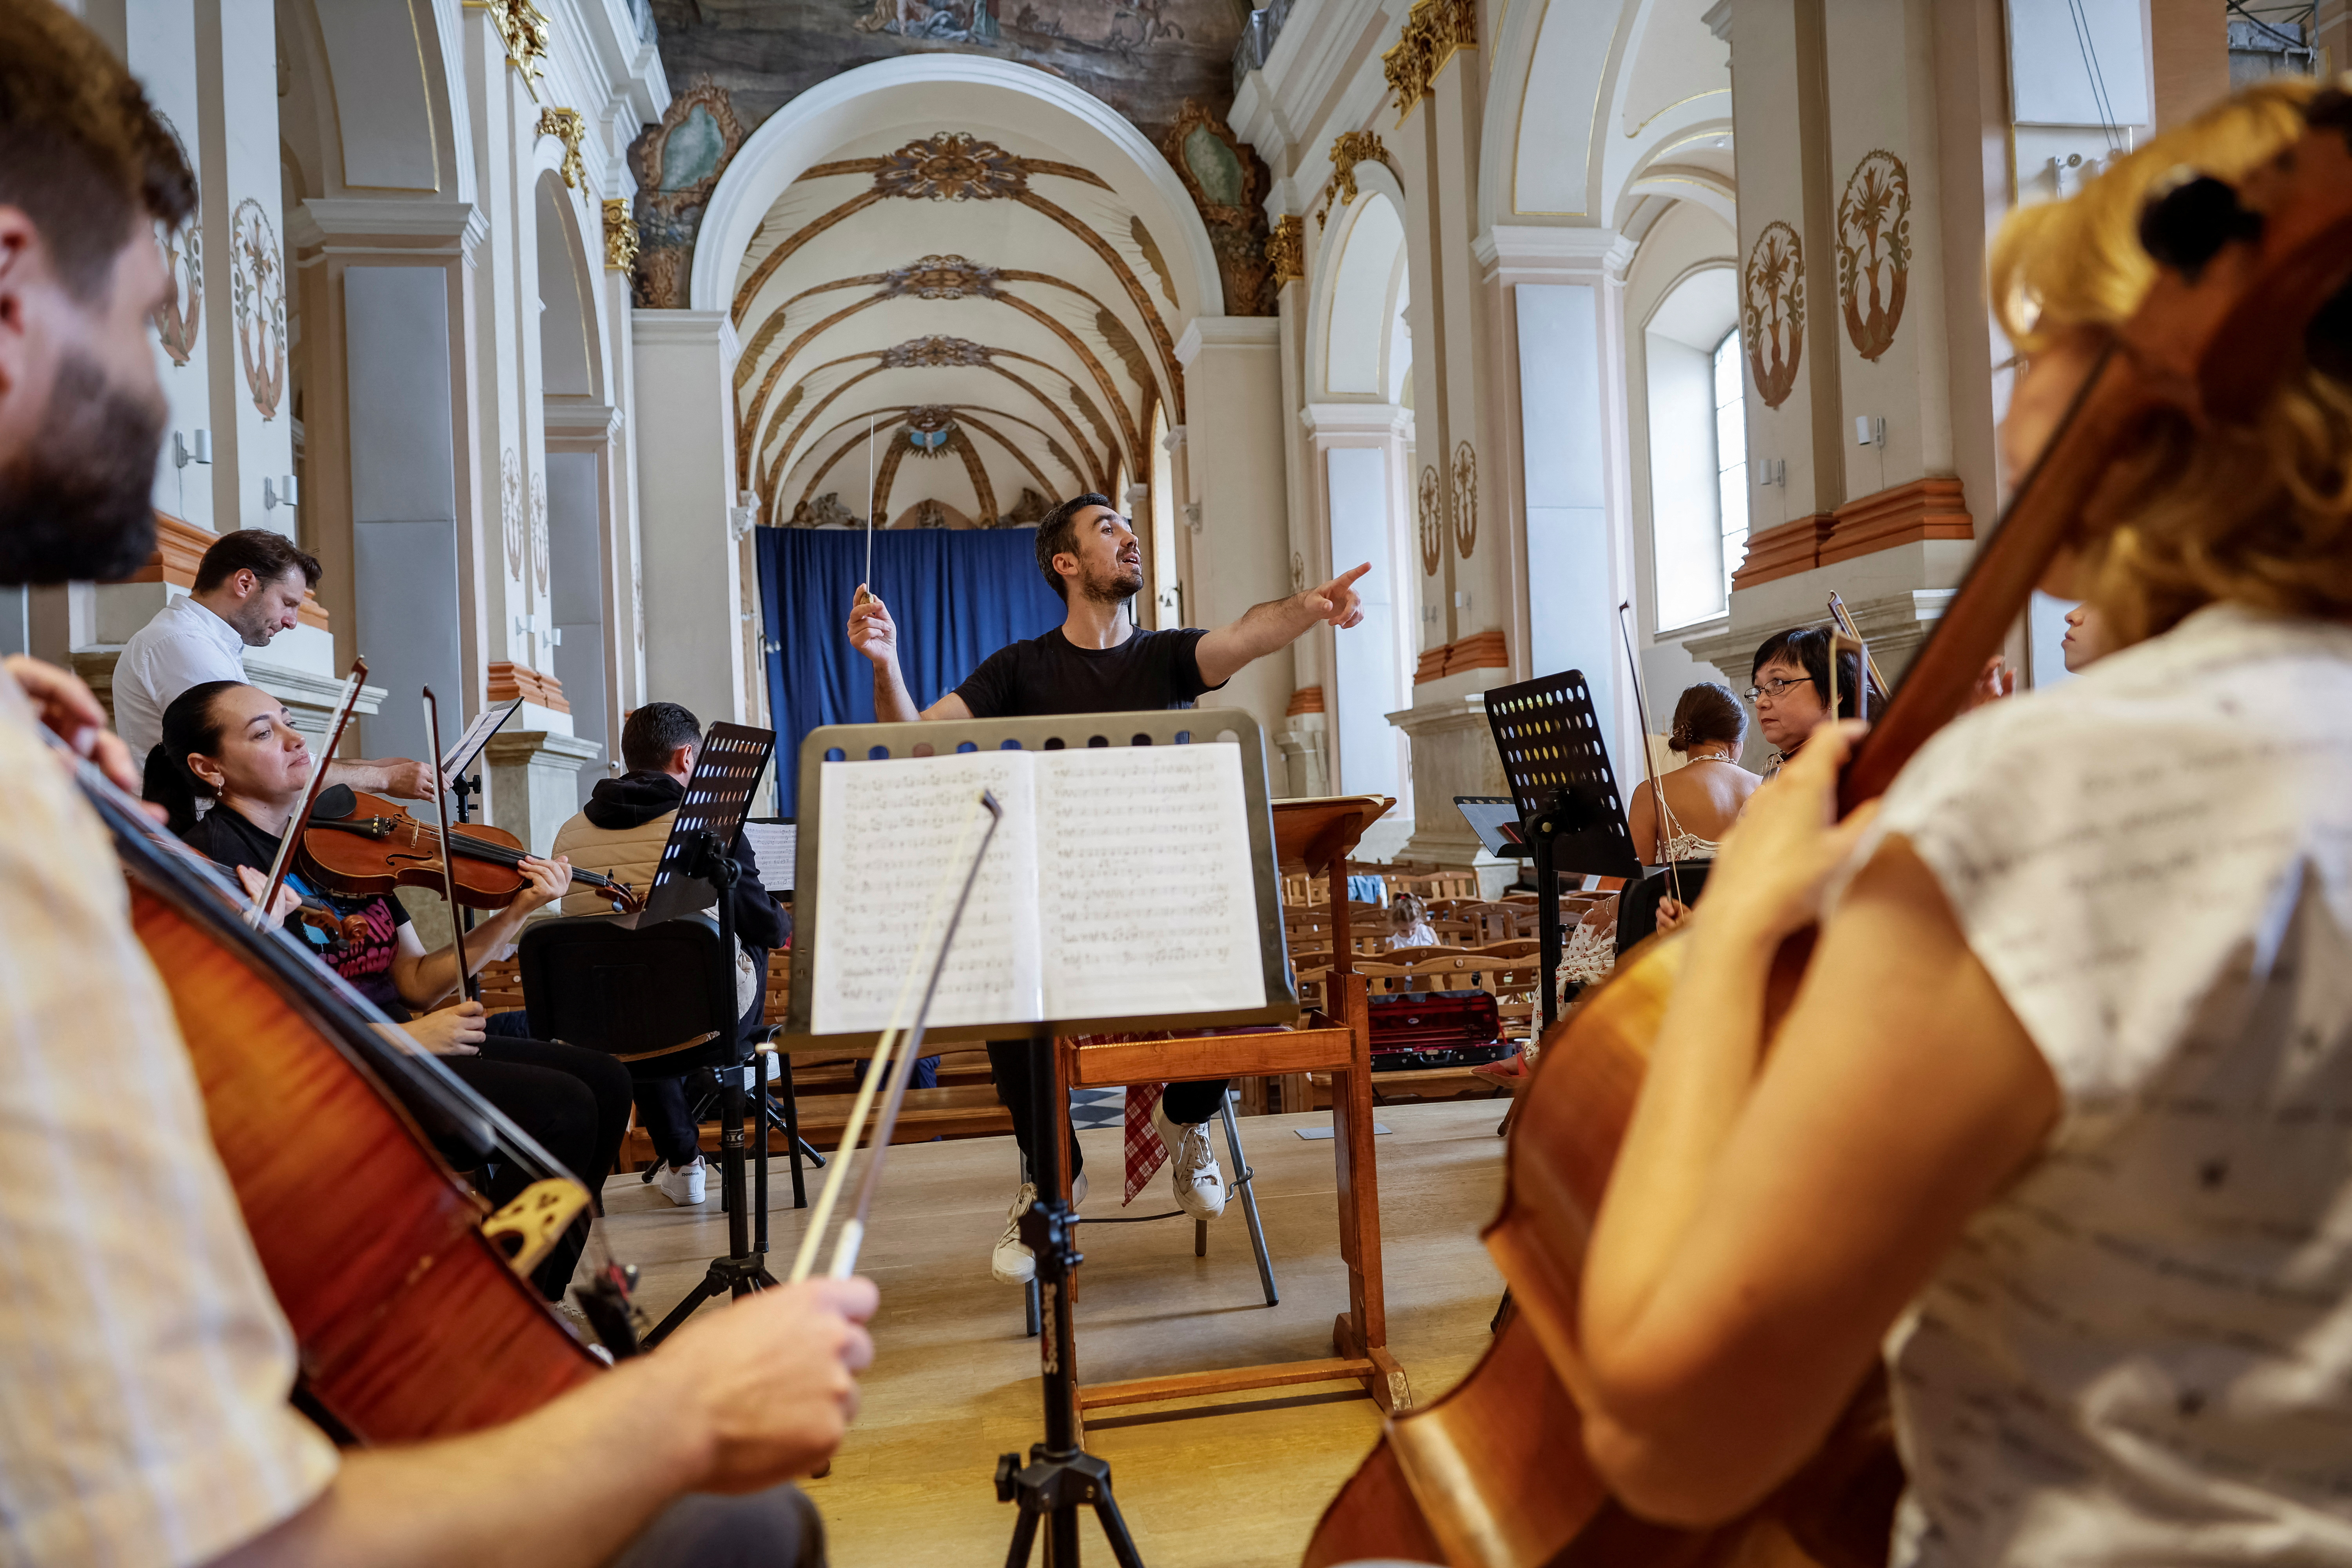 Ivan Ostapovych, Lviv Organ Hall's co-director and conductor, rehearses with musicians of the Luhansk Philharmonic